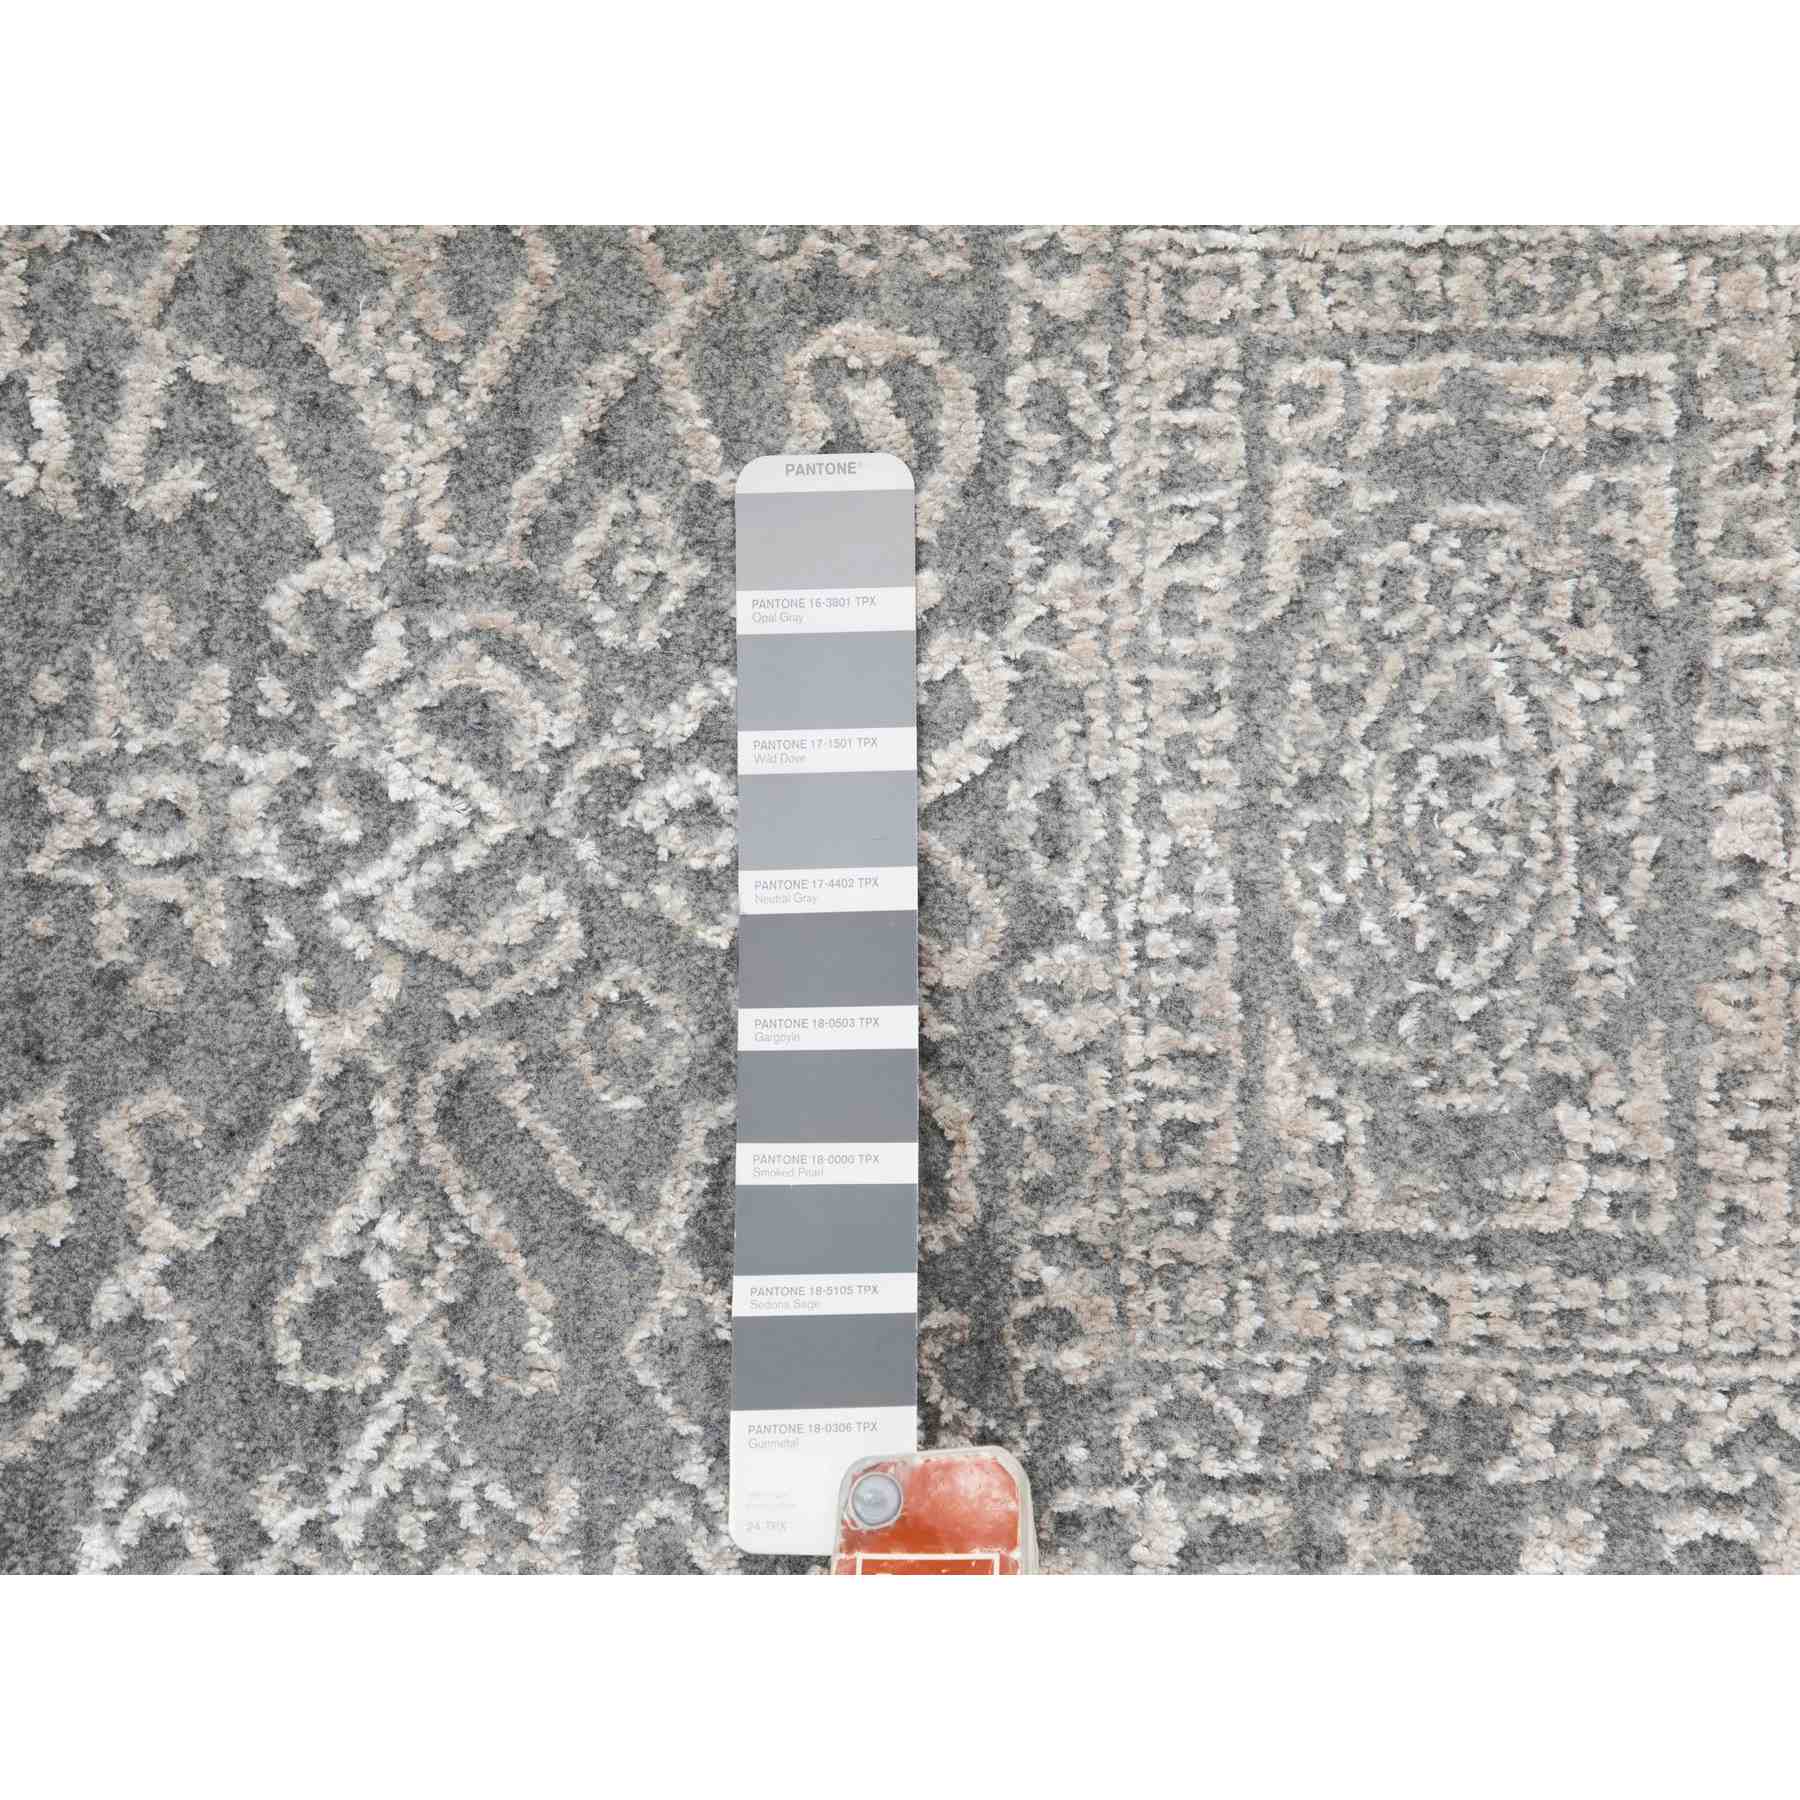 Modern-and-Contemporary-Hand-Loomed-Rug-292045